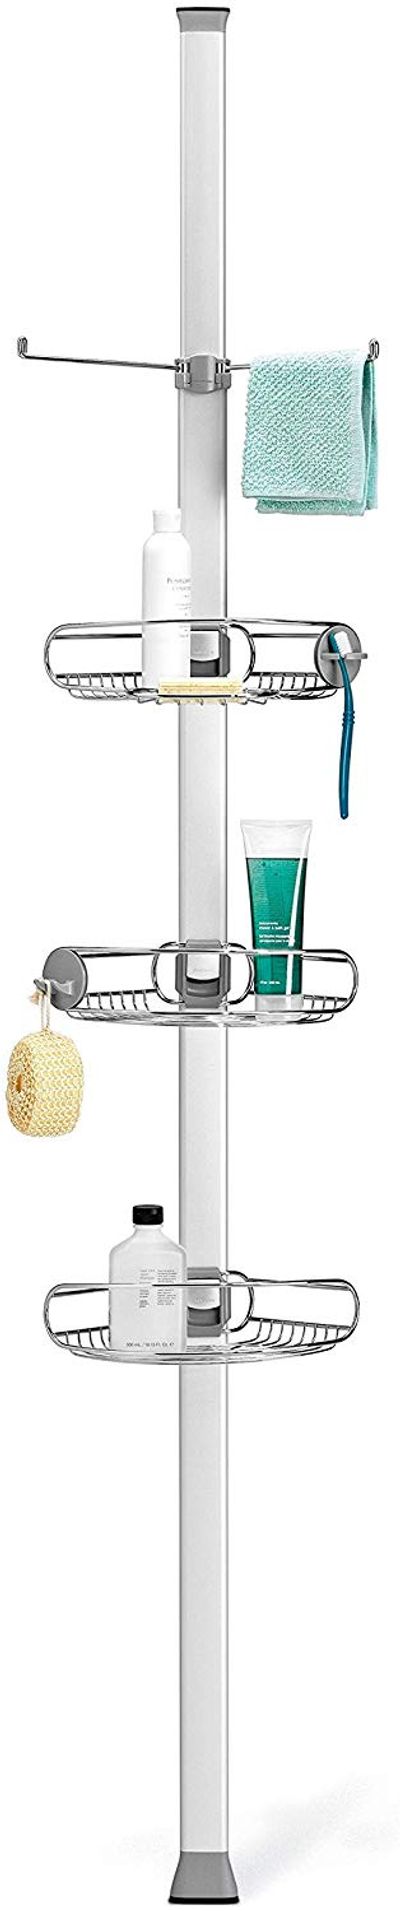 simplehuman Tension Shower Caddy, Stainless Steel + Anodized Aluminum on Sale for $ 169.99 at Amazon Canada